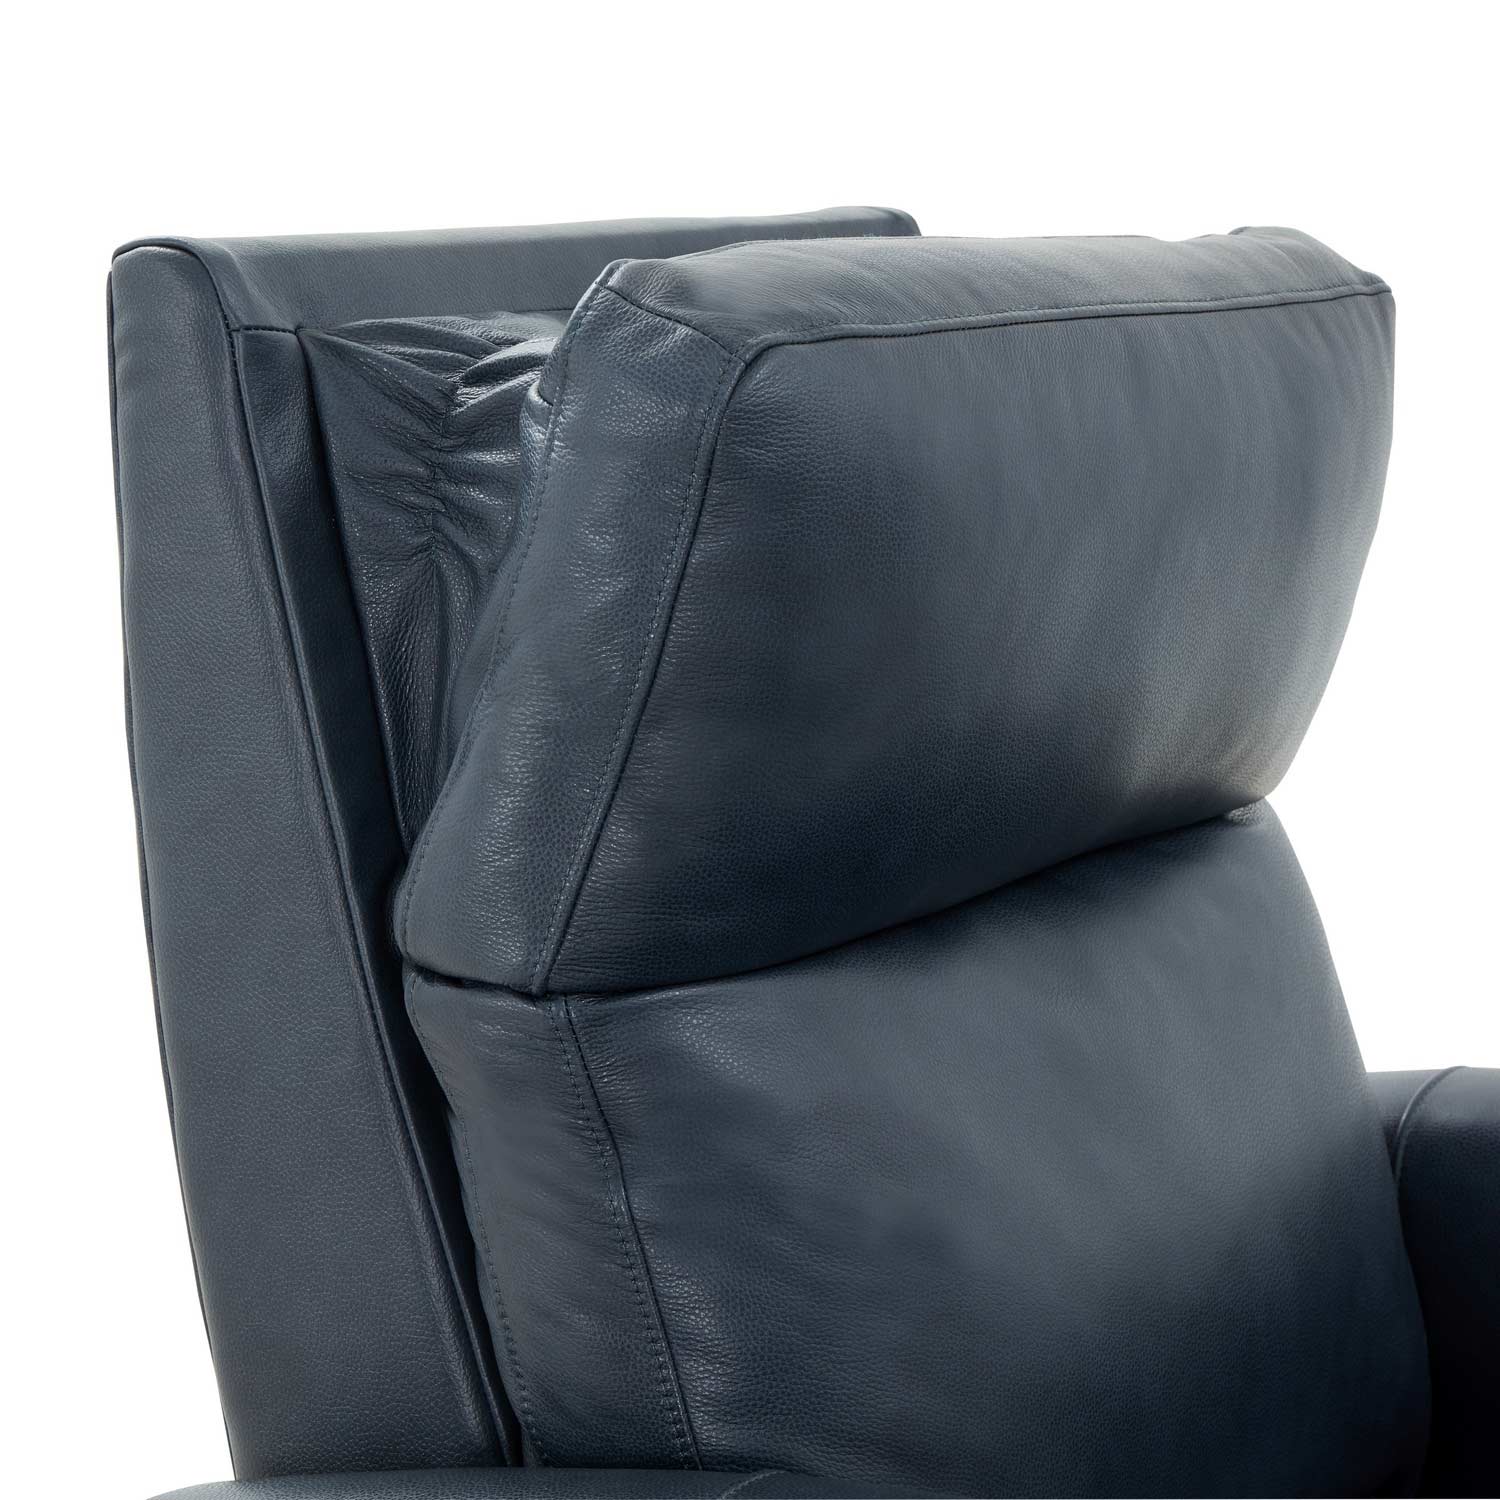 Barcalounger Jeffrey Zero Gravity Power Recliner Chair with Power Head Rest and Lumbar - Barone Navy Blue/All Leather